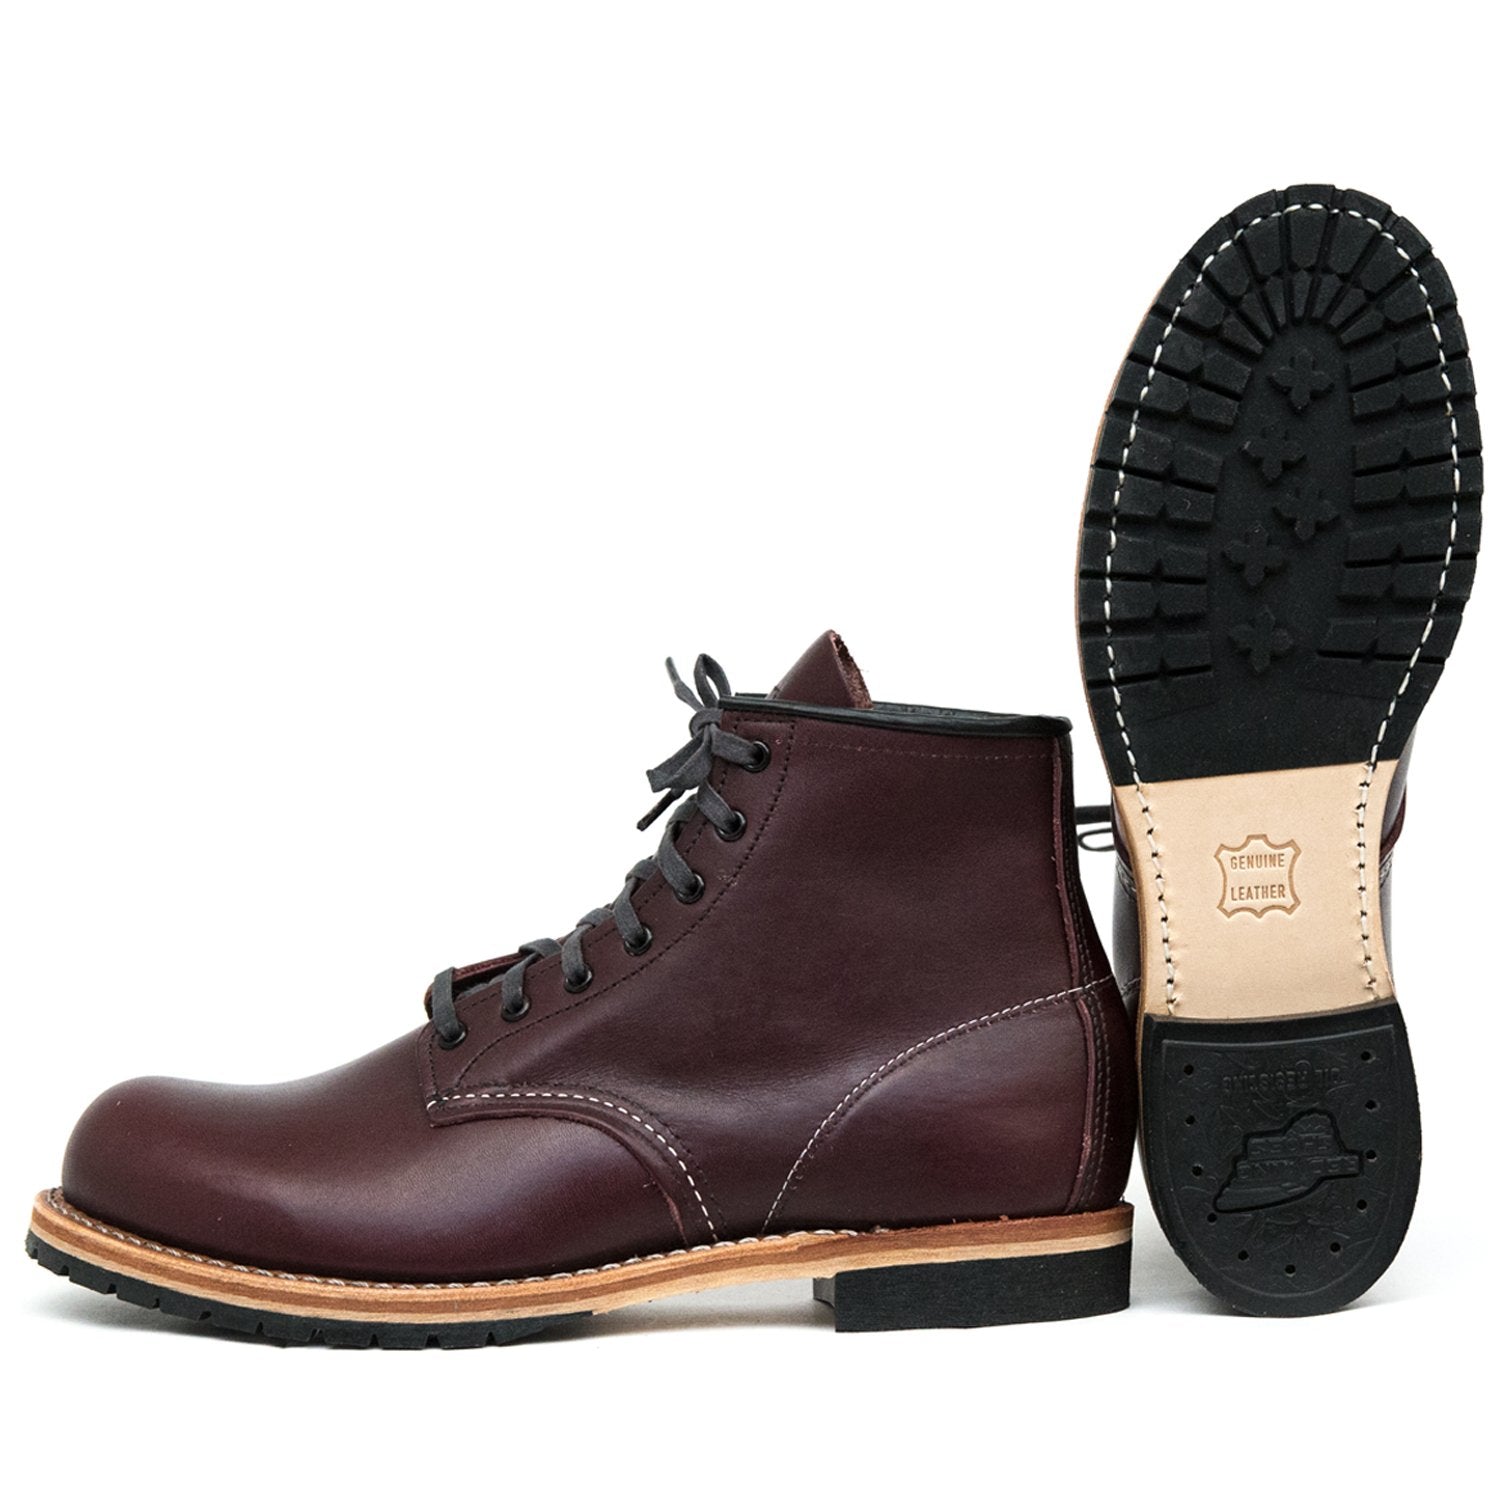 RED WING SHOES BECKMAN ROUND STYLE NO. 9011